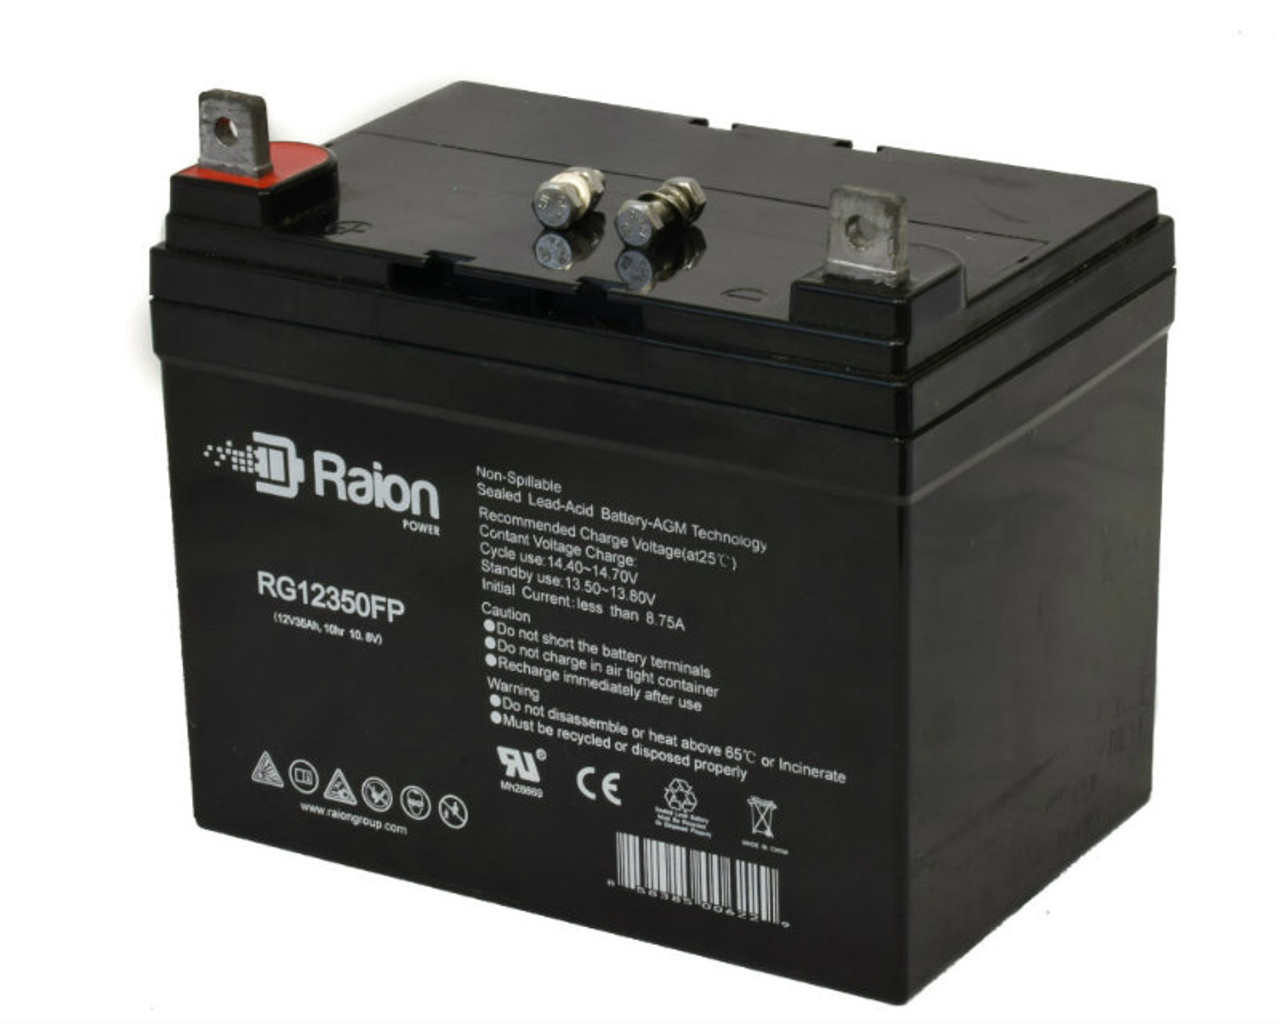 Raion Power Replacement 12V 35Ah RG12350FP Battery for Speedex Tractor 103